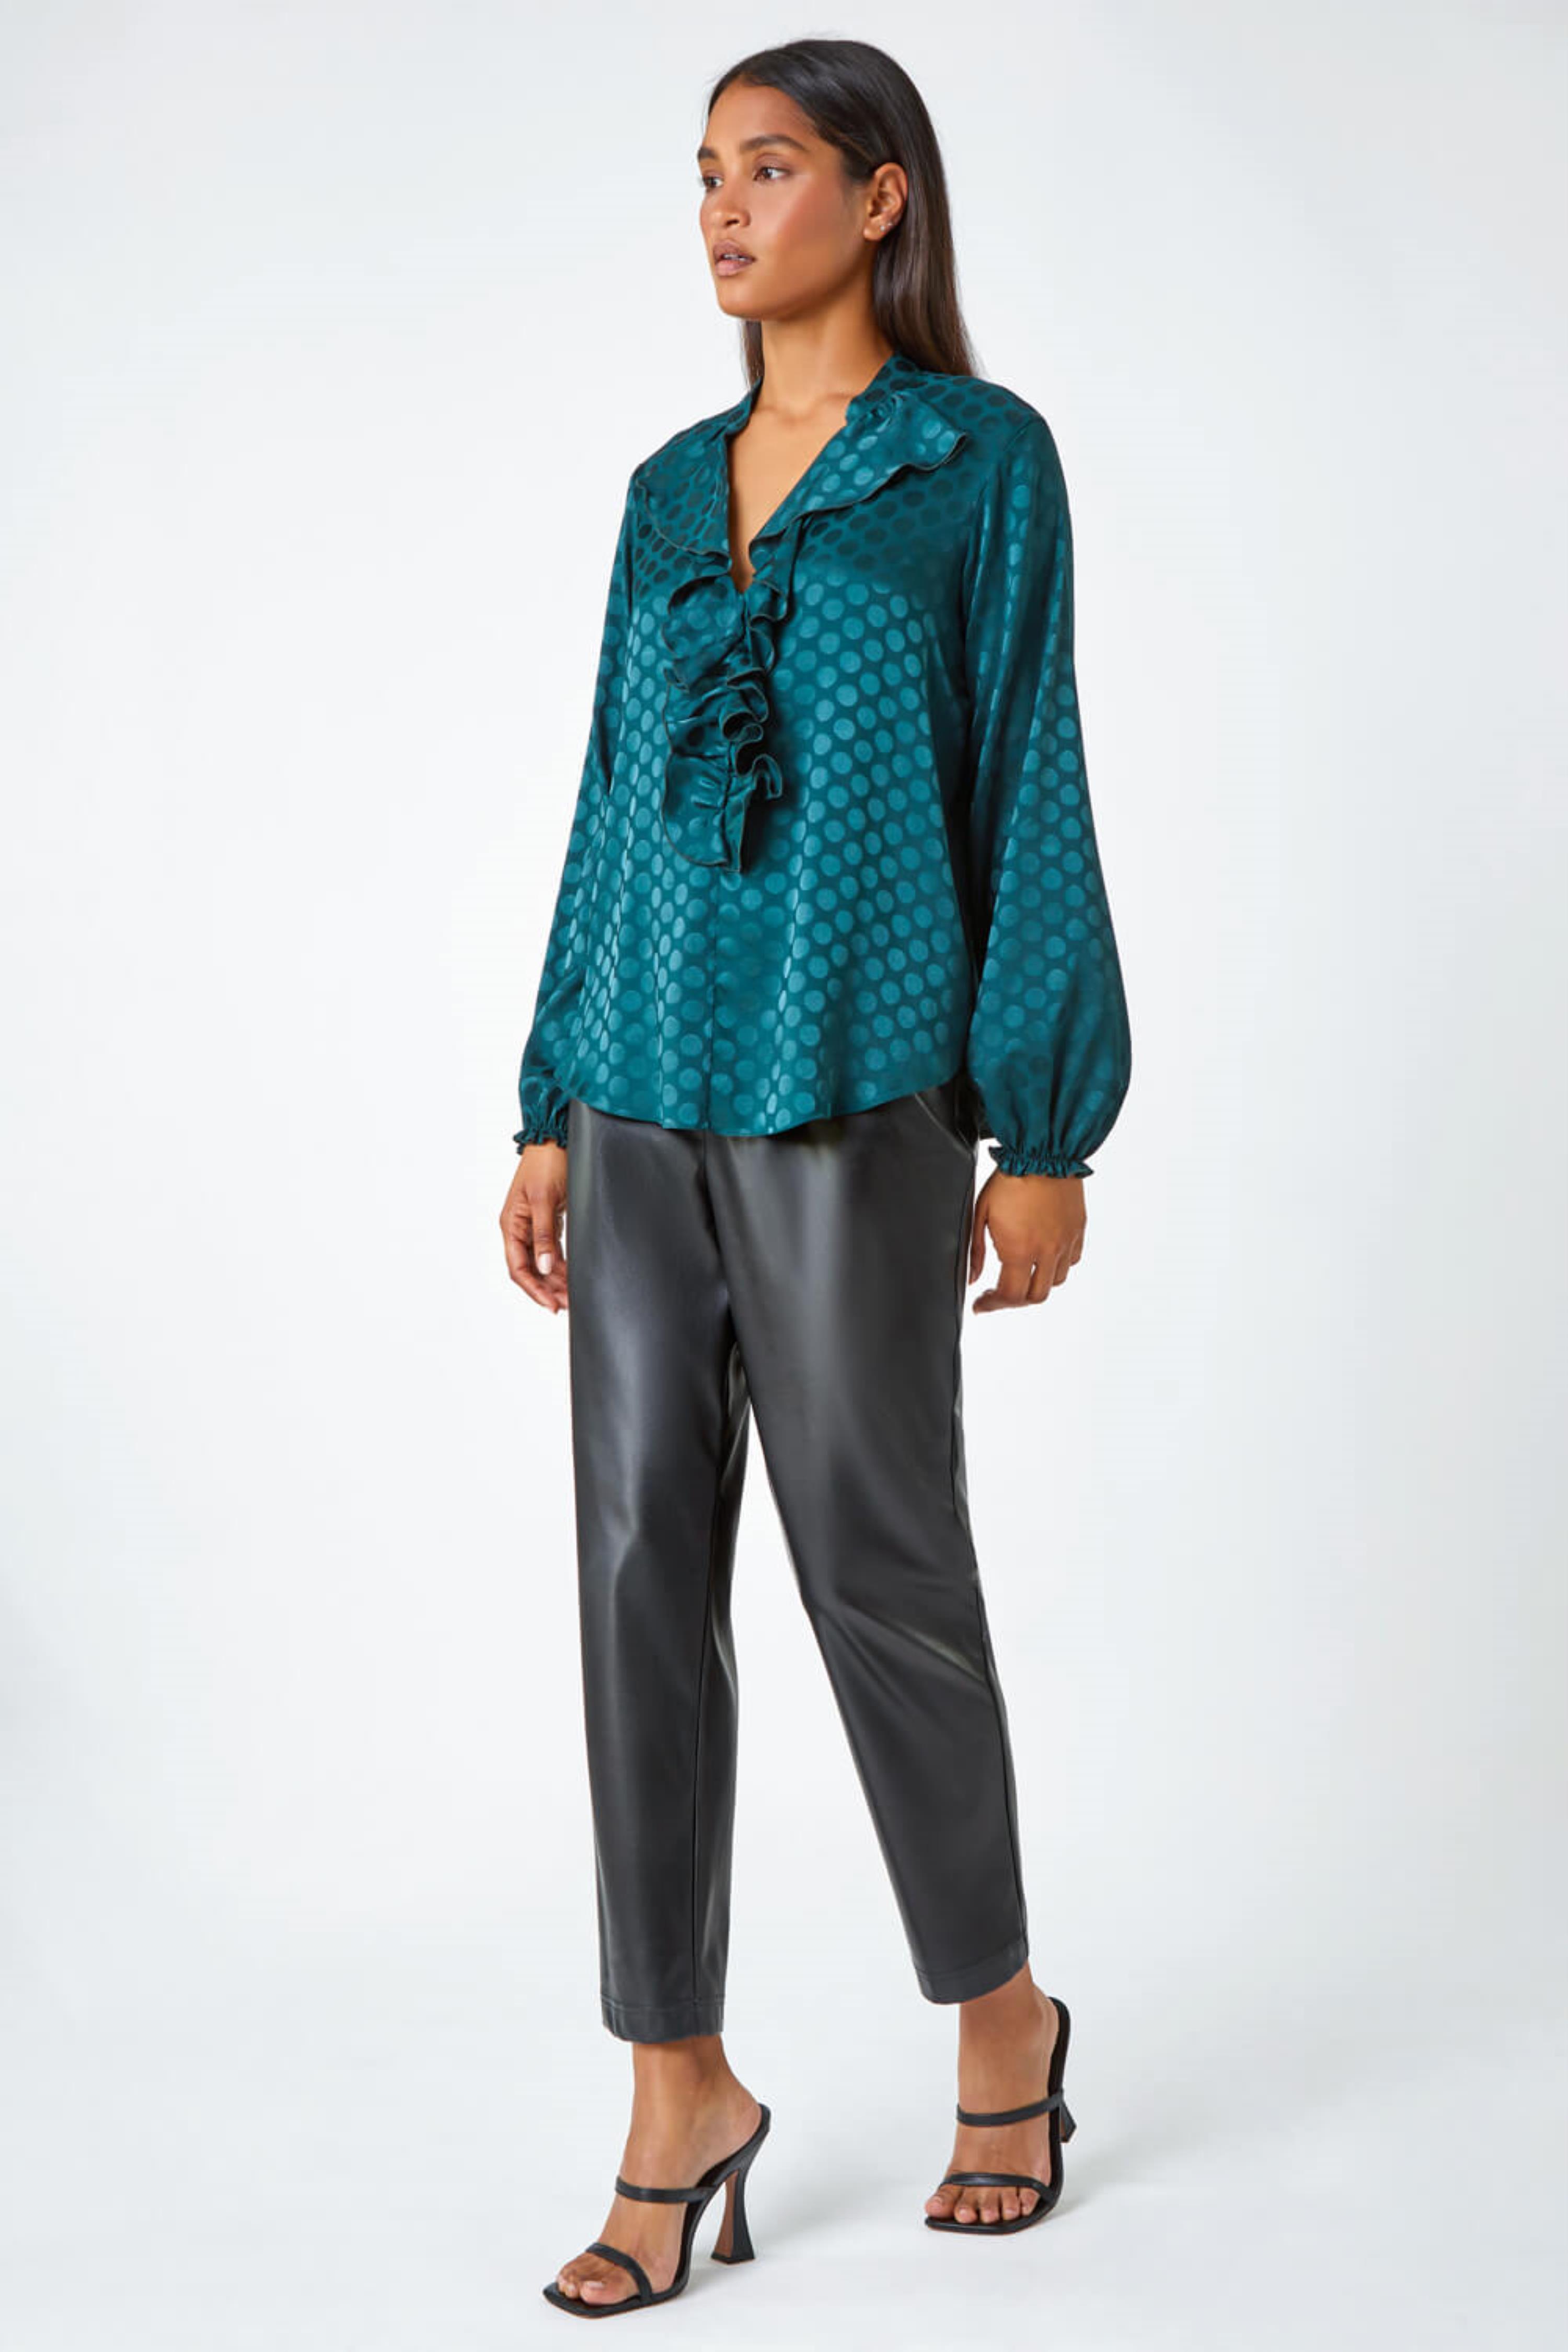 Forest  Spot Print Ruffle Trim Stretch Top, Image 4 of 5